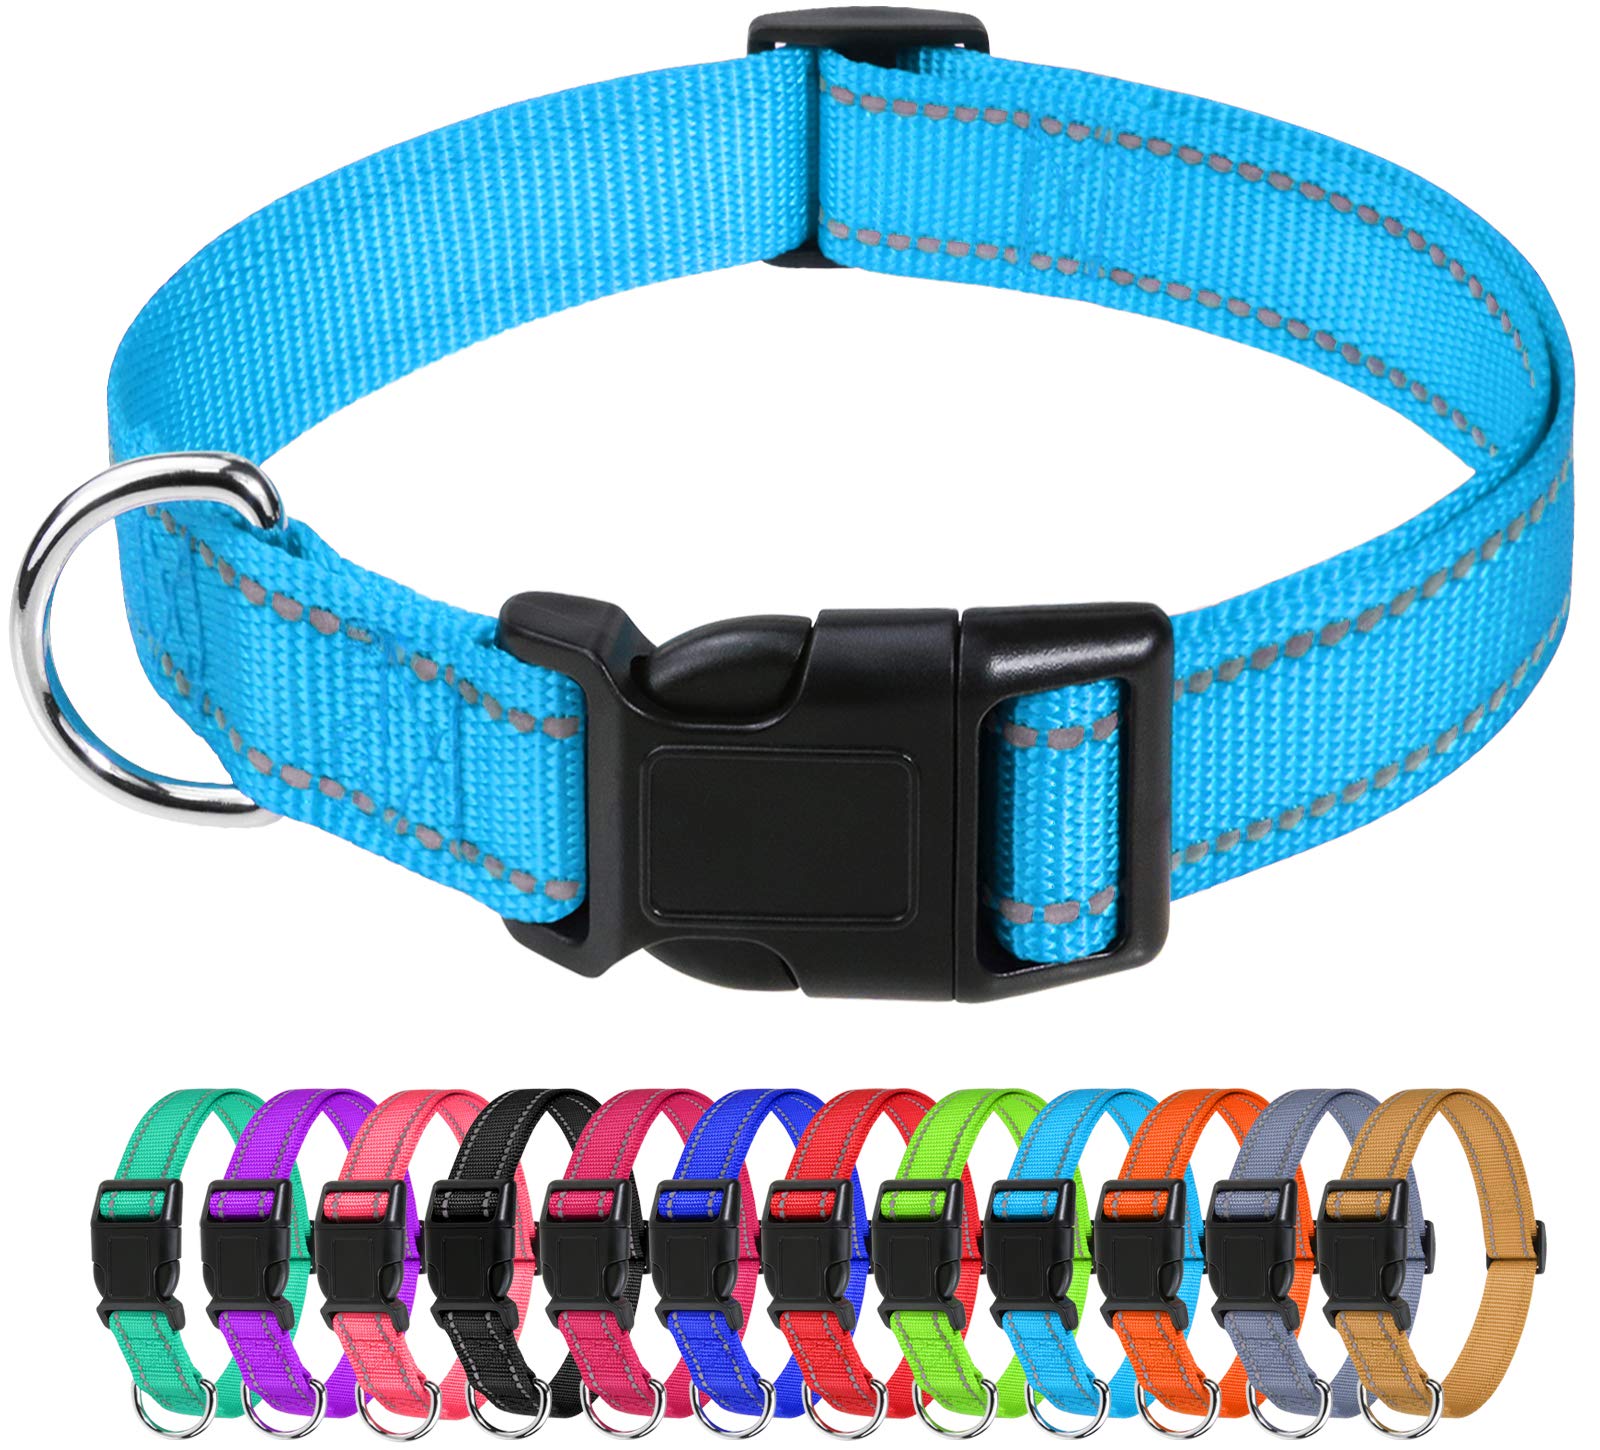 Tagme Reflective Nylon Dog Collars, Adjustable Classic Dog Collar With Quick Release Buckle For Large Dogs, Sky Blue, 1.0 Width